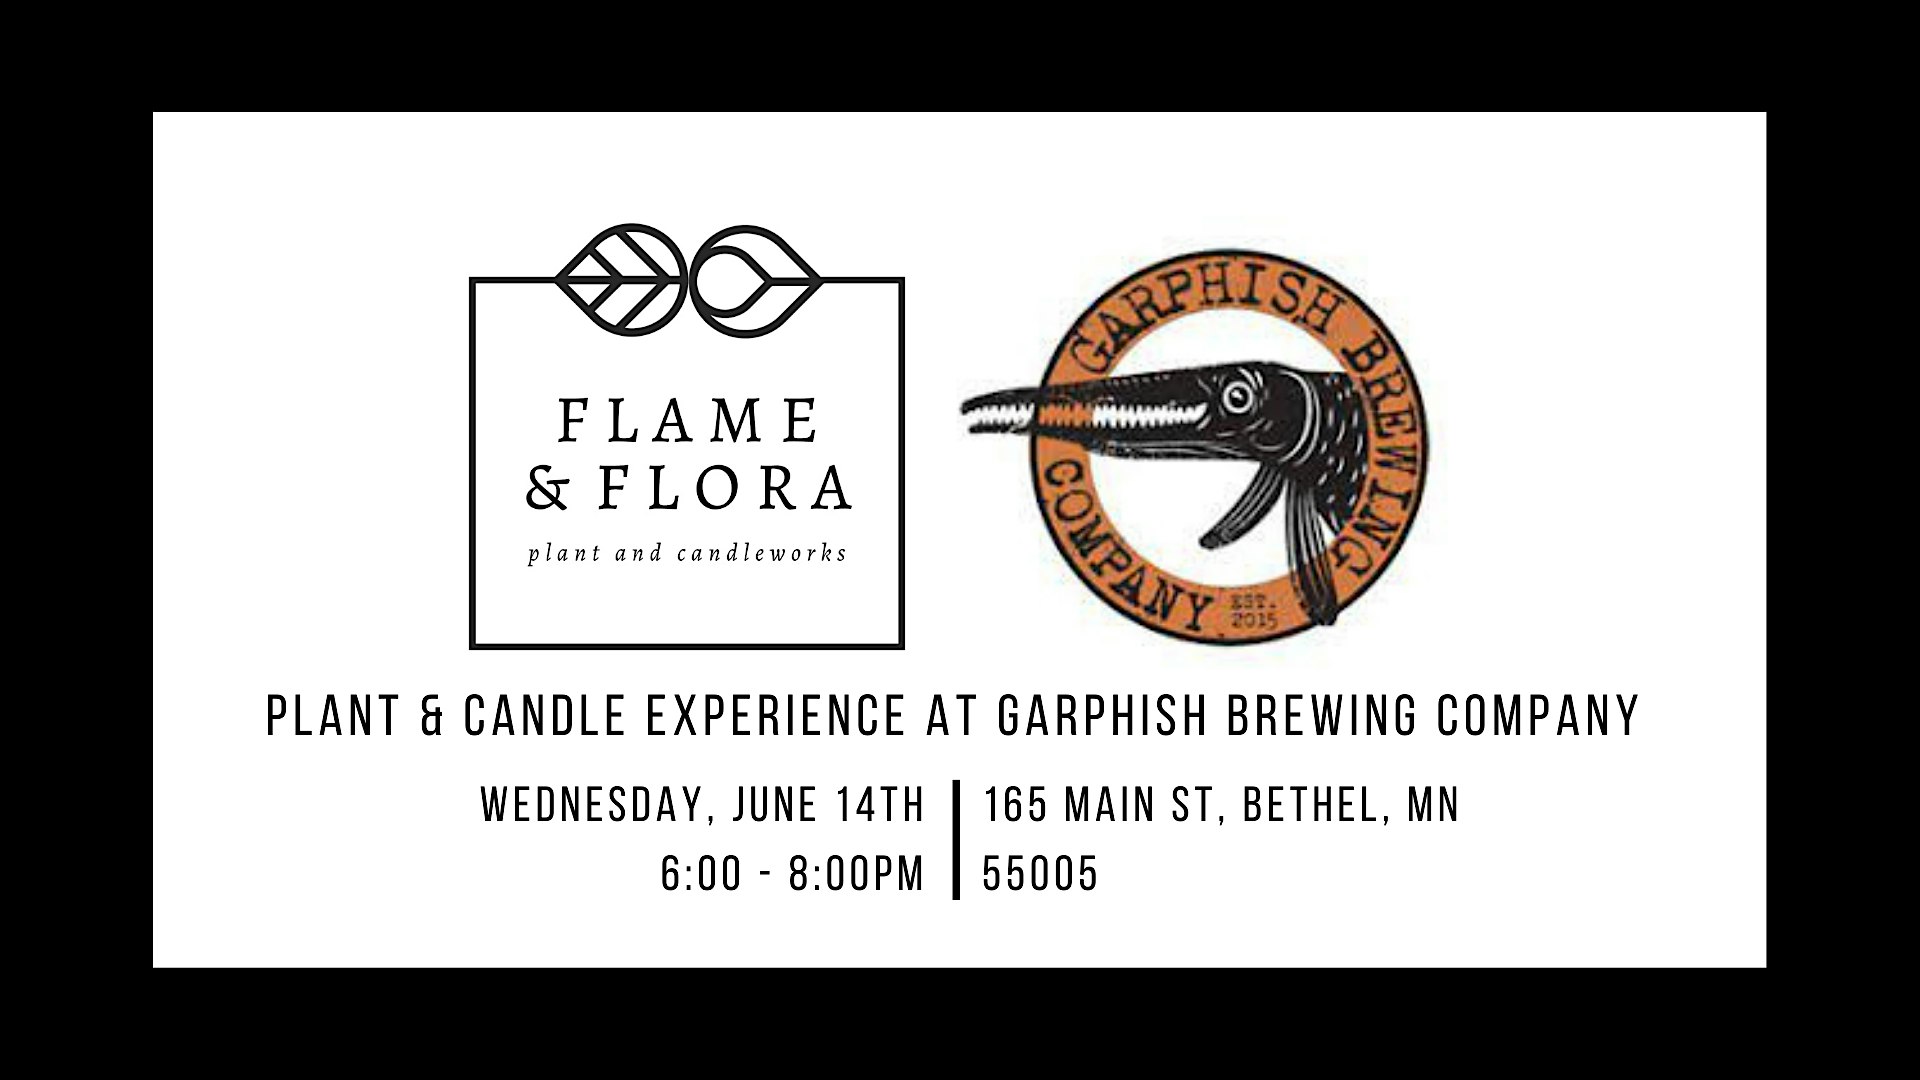 Plant & Candle Experience at Garphish Brewing Company